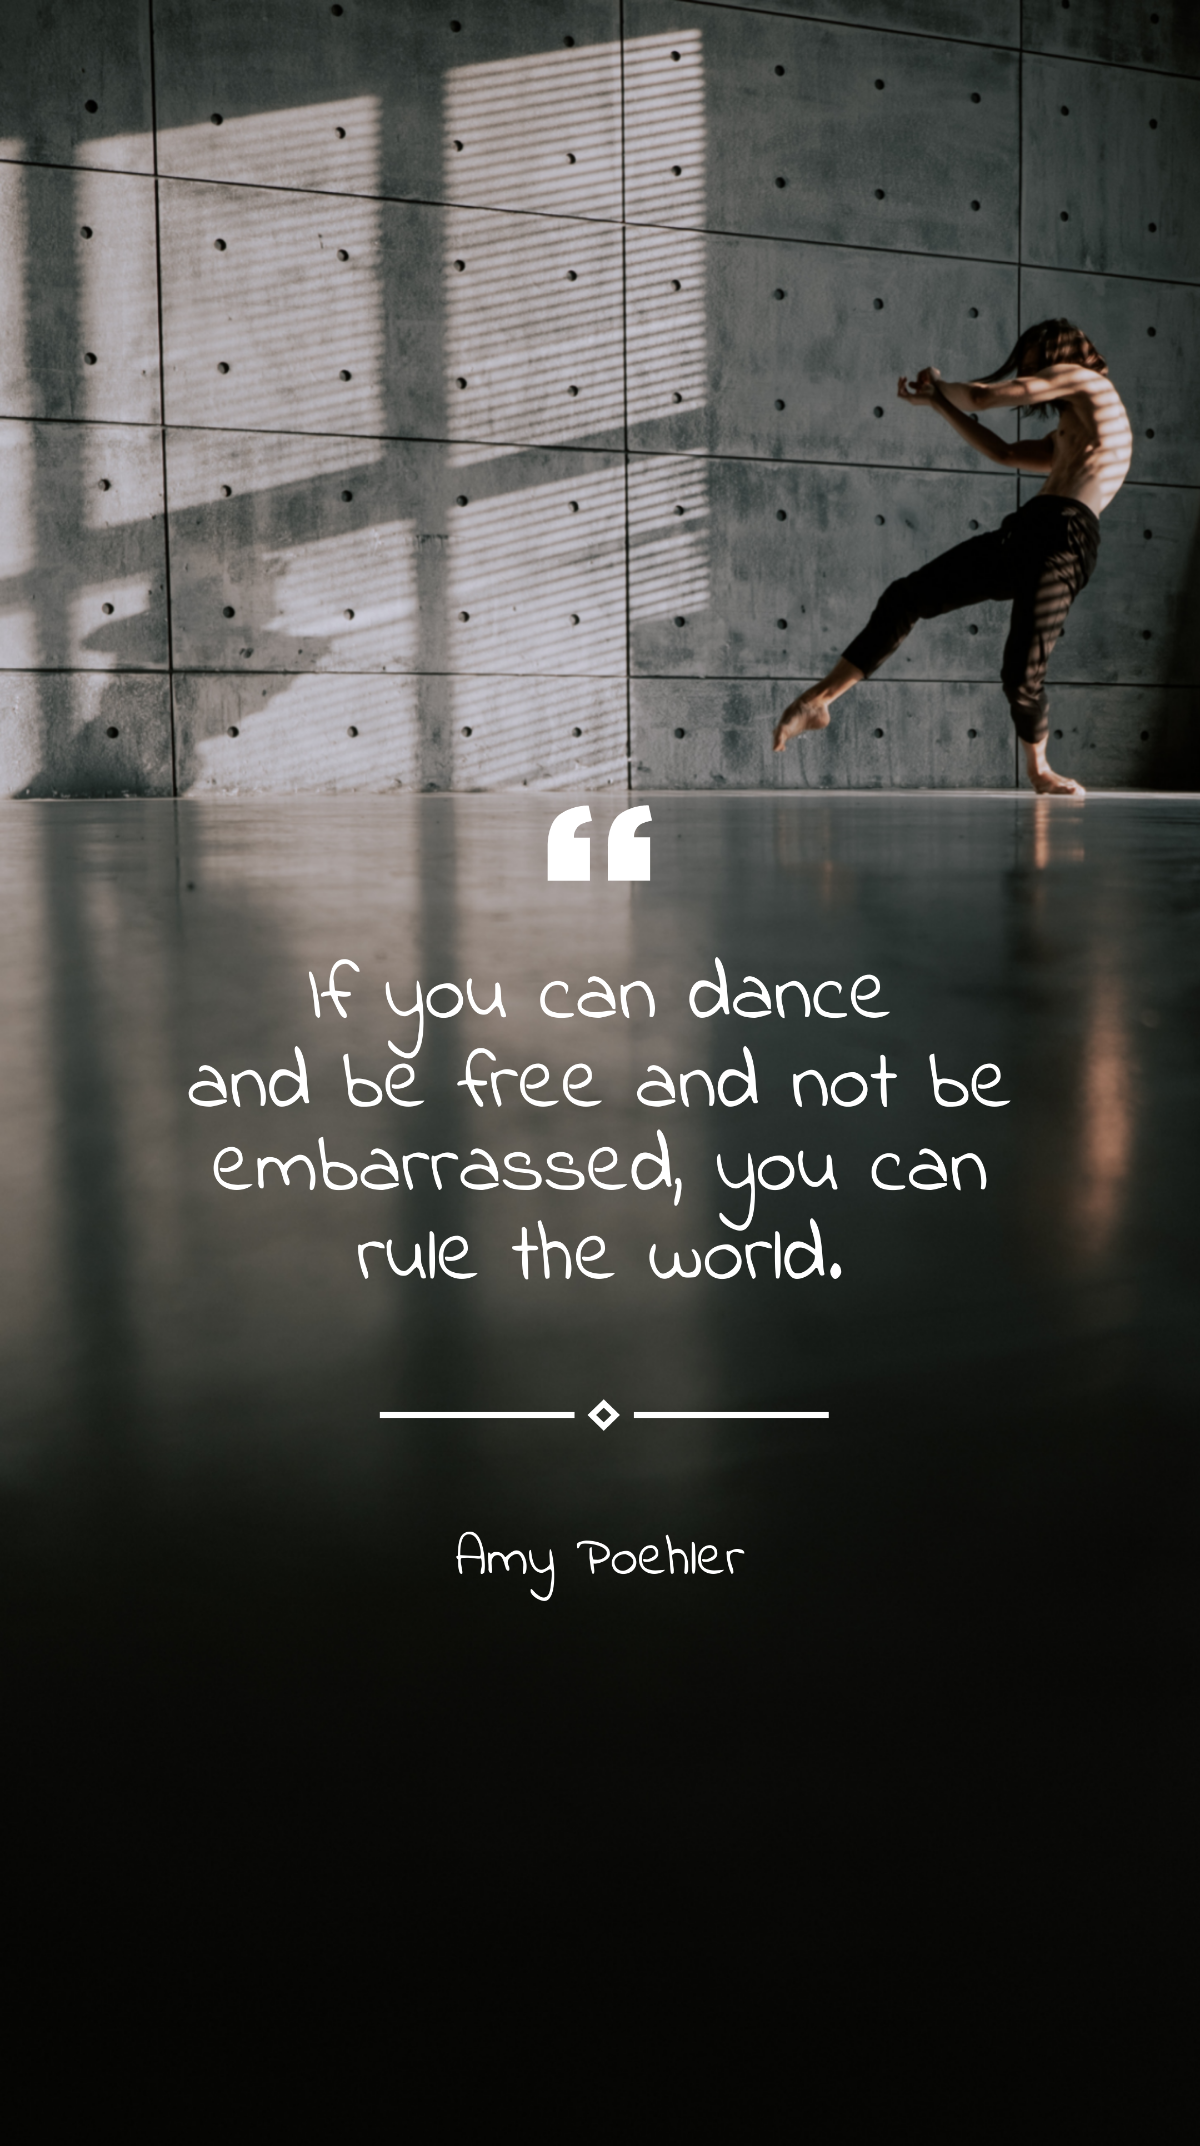 Amy Poehler - “If you can dance and be and not be embarrassed, you can rule the world.”